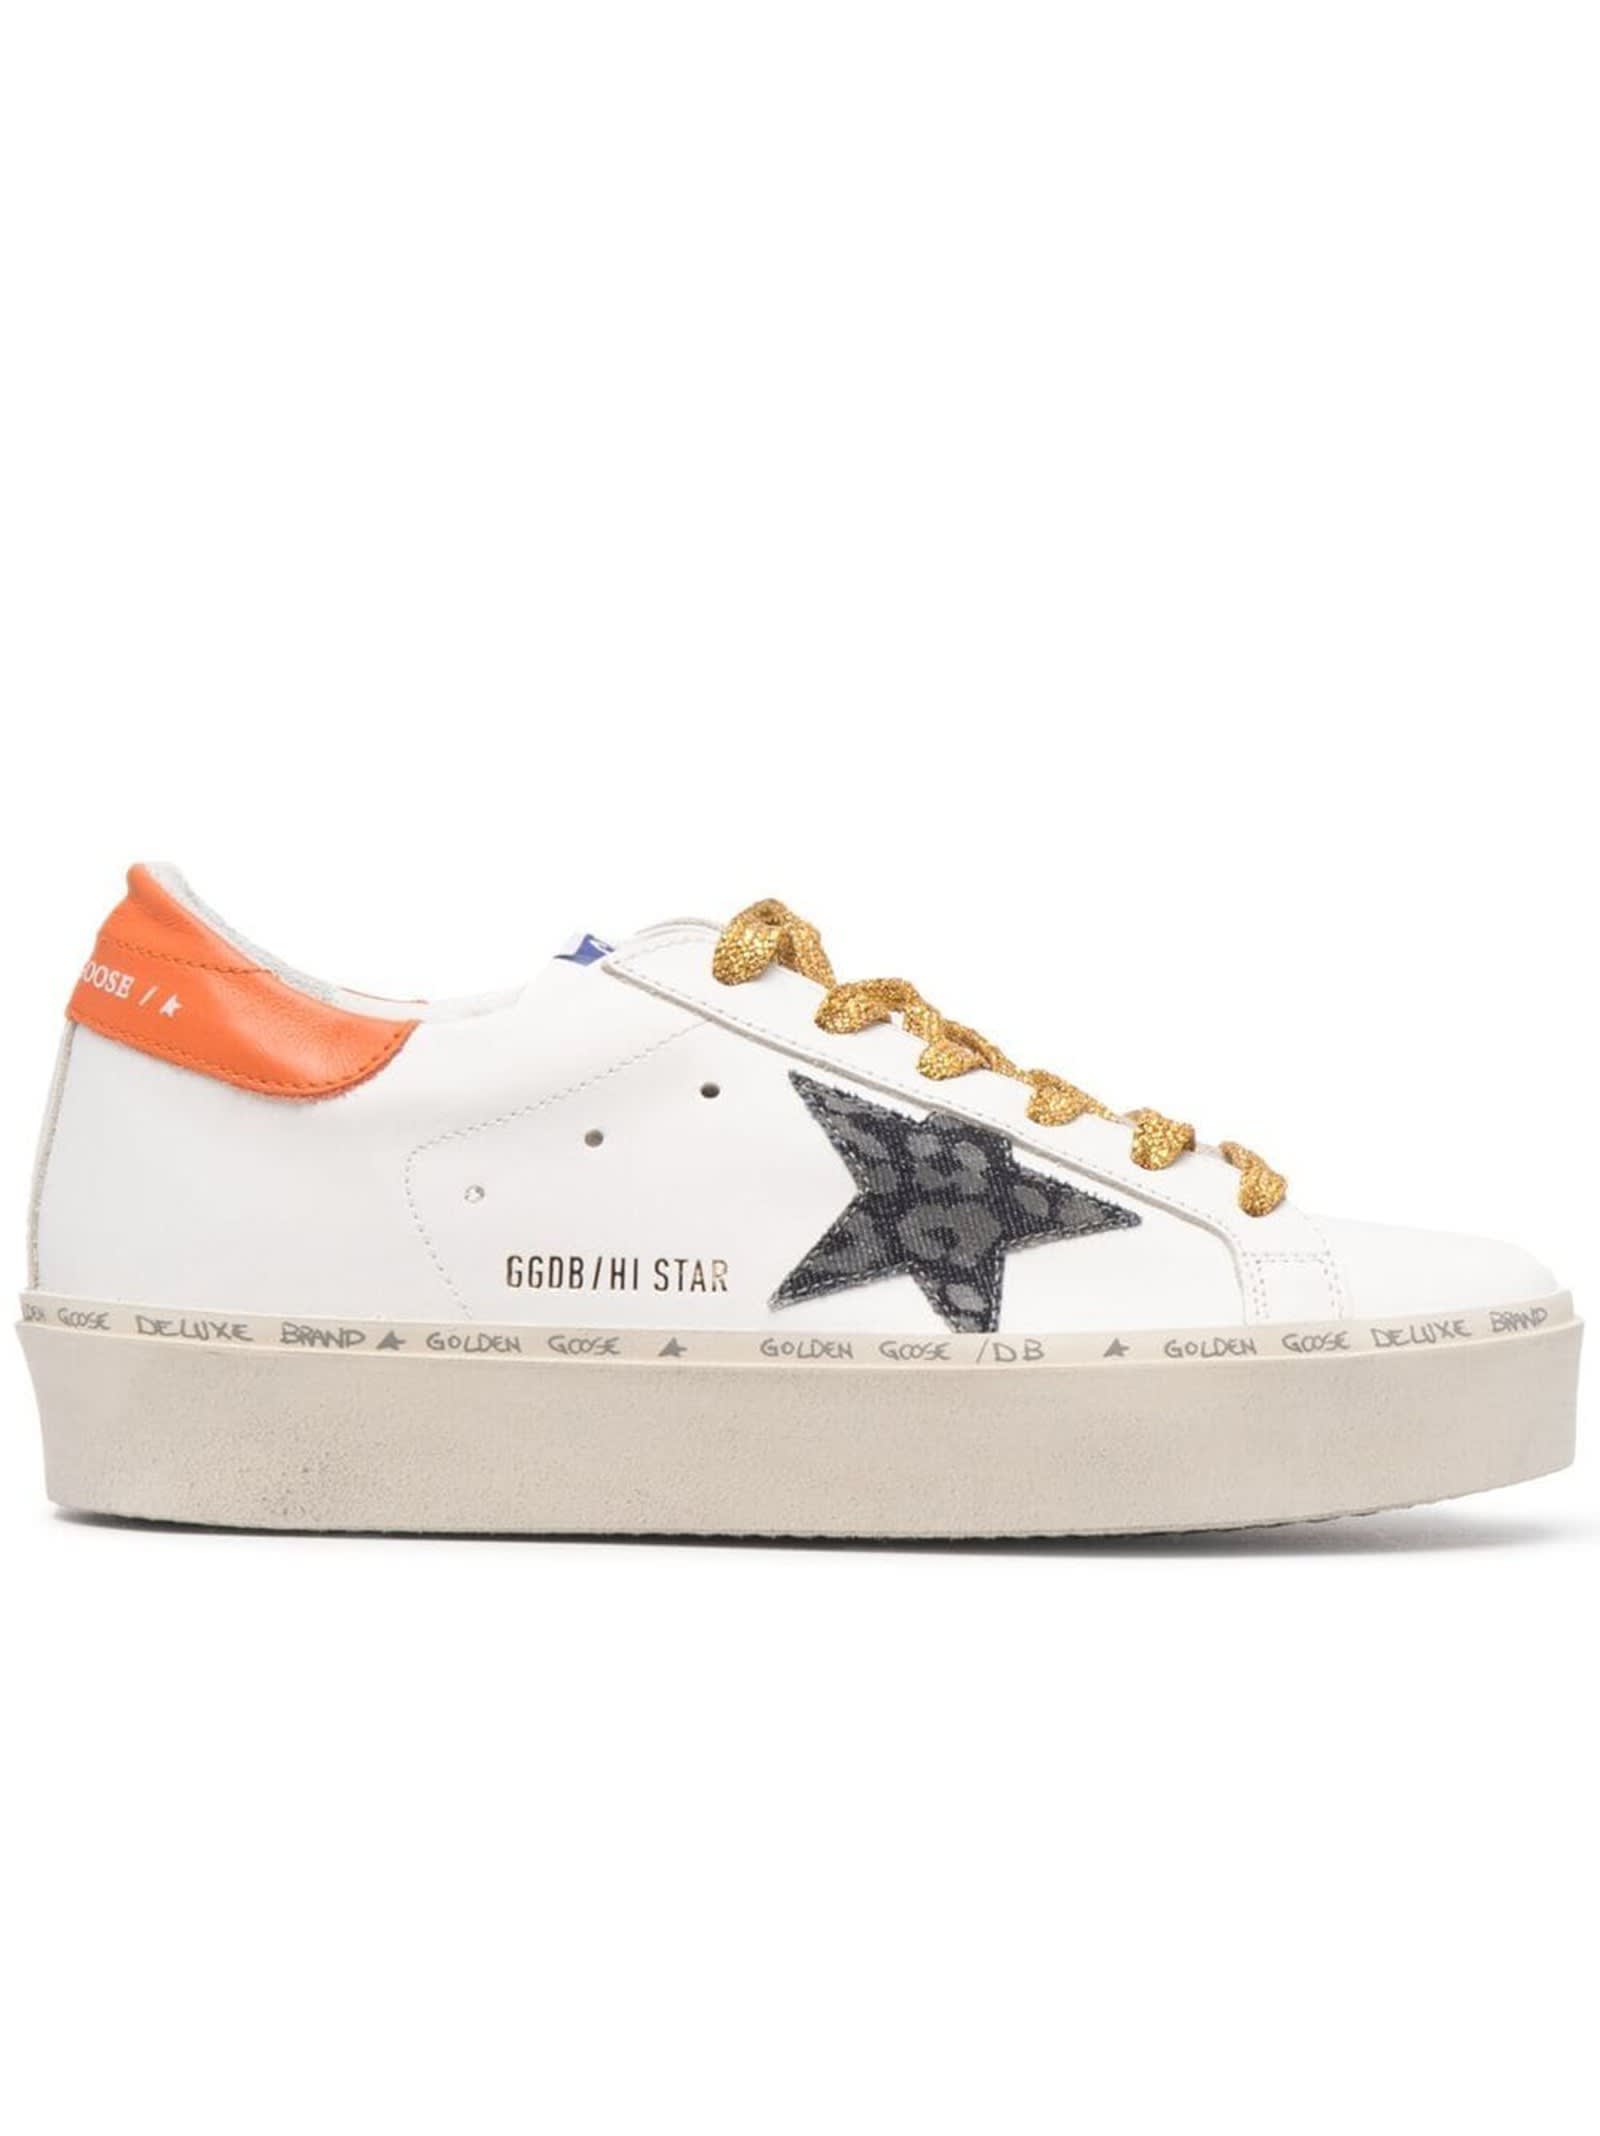 Golden Goose White Leather Hi Star Sneakers